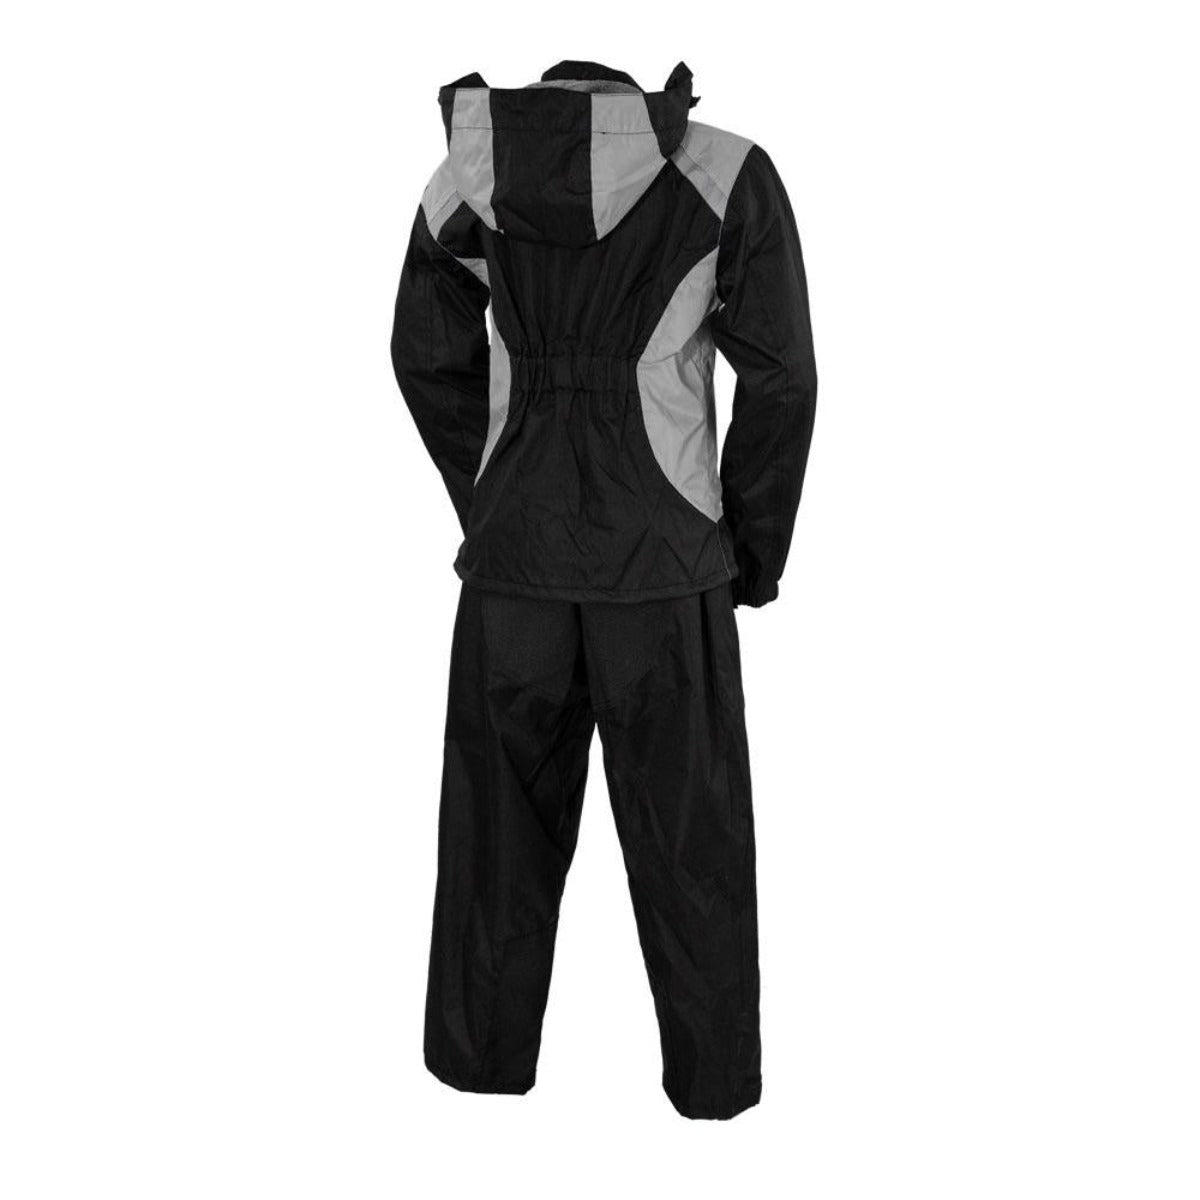 First Manufacturing Ripstop - Women's Breathable Rain Suit, Black/Grey